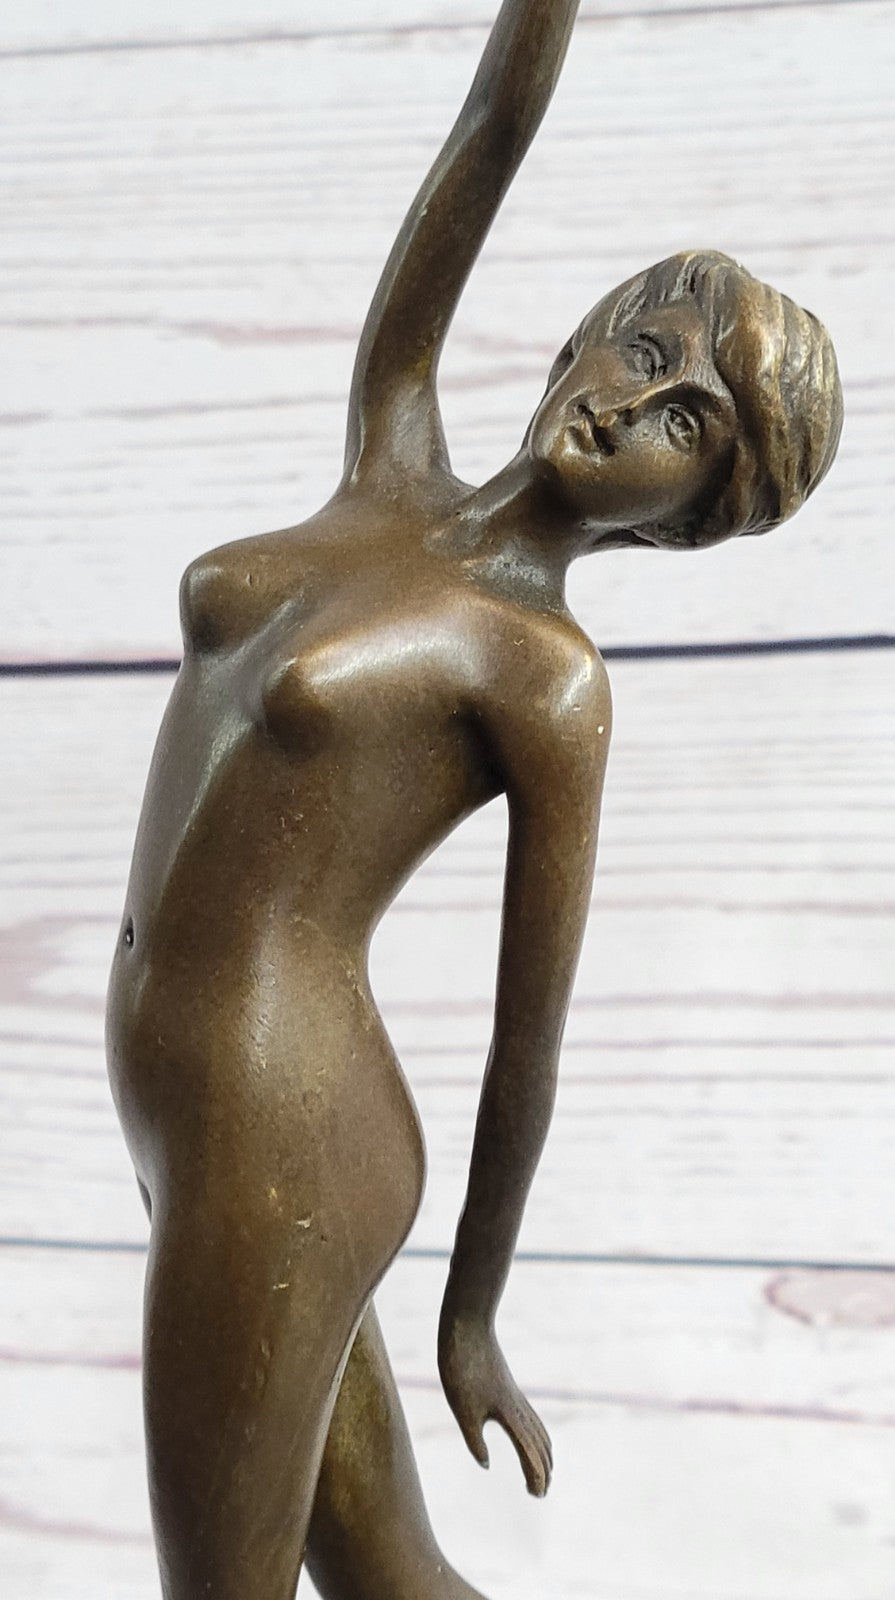 Handcrafted bronze sculpture SALE Marble Marble Posing Dancer Fall Free Nude Art